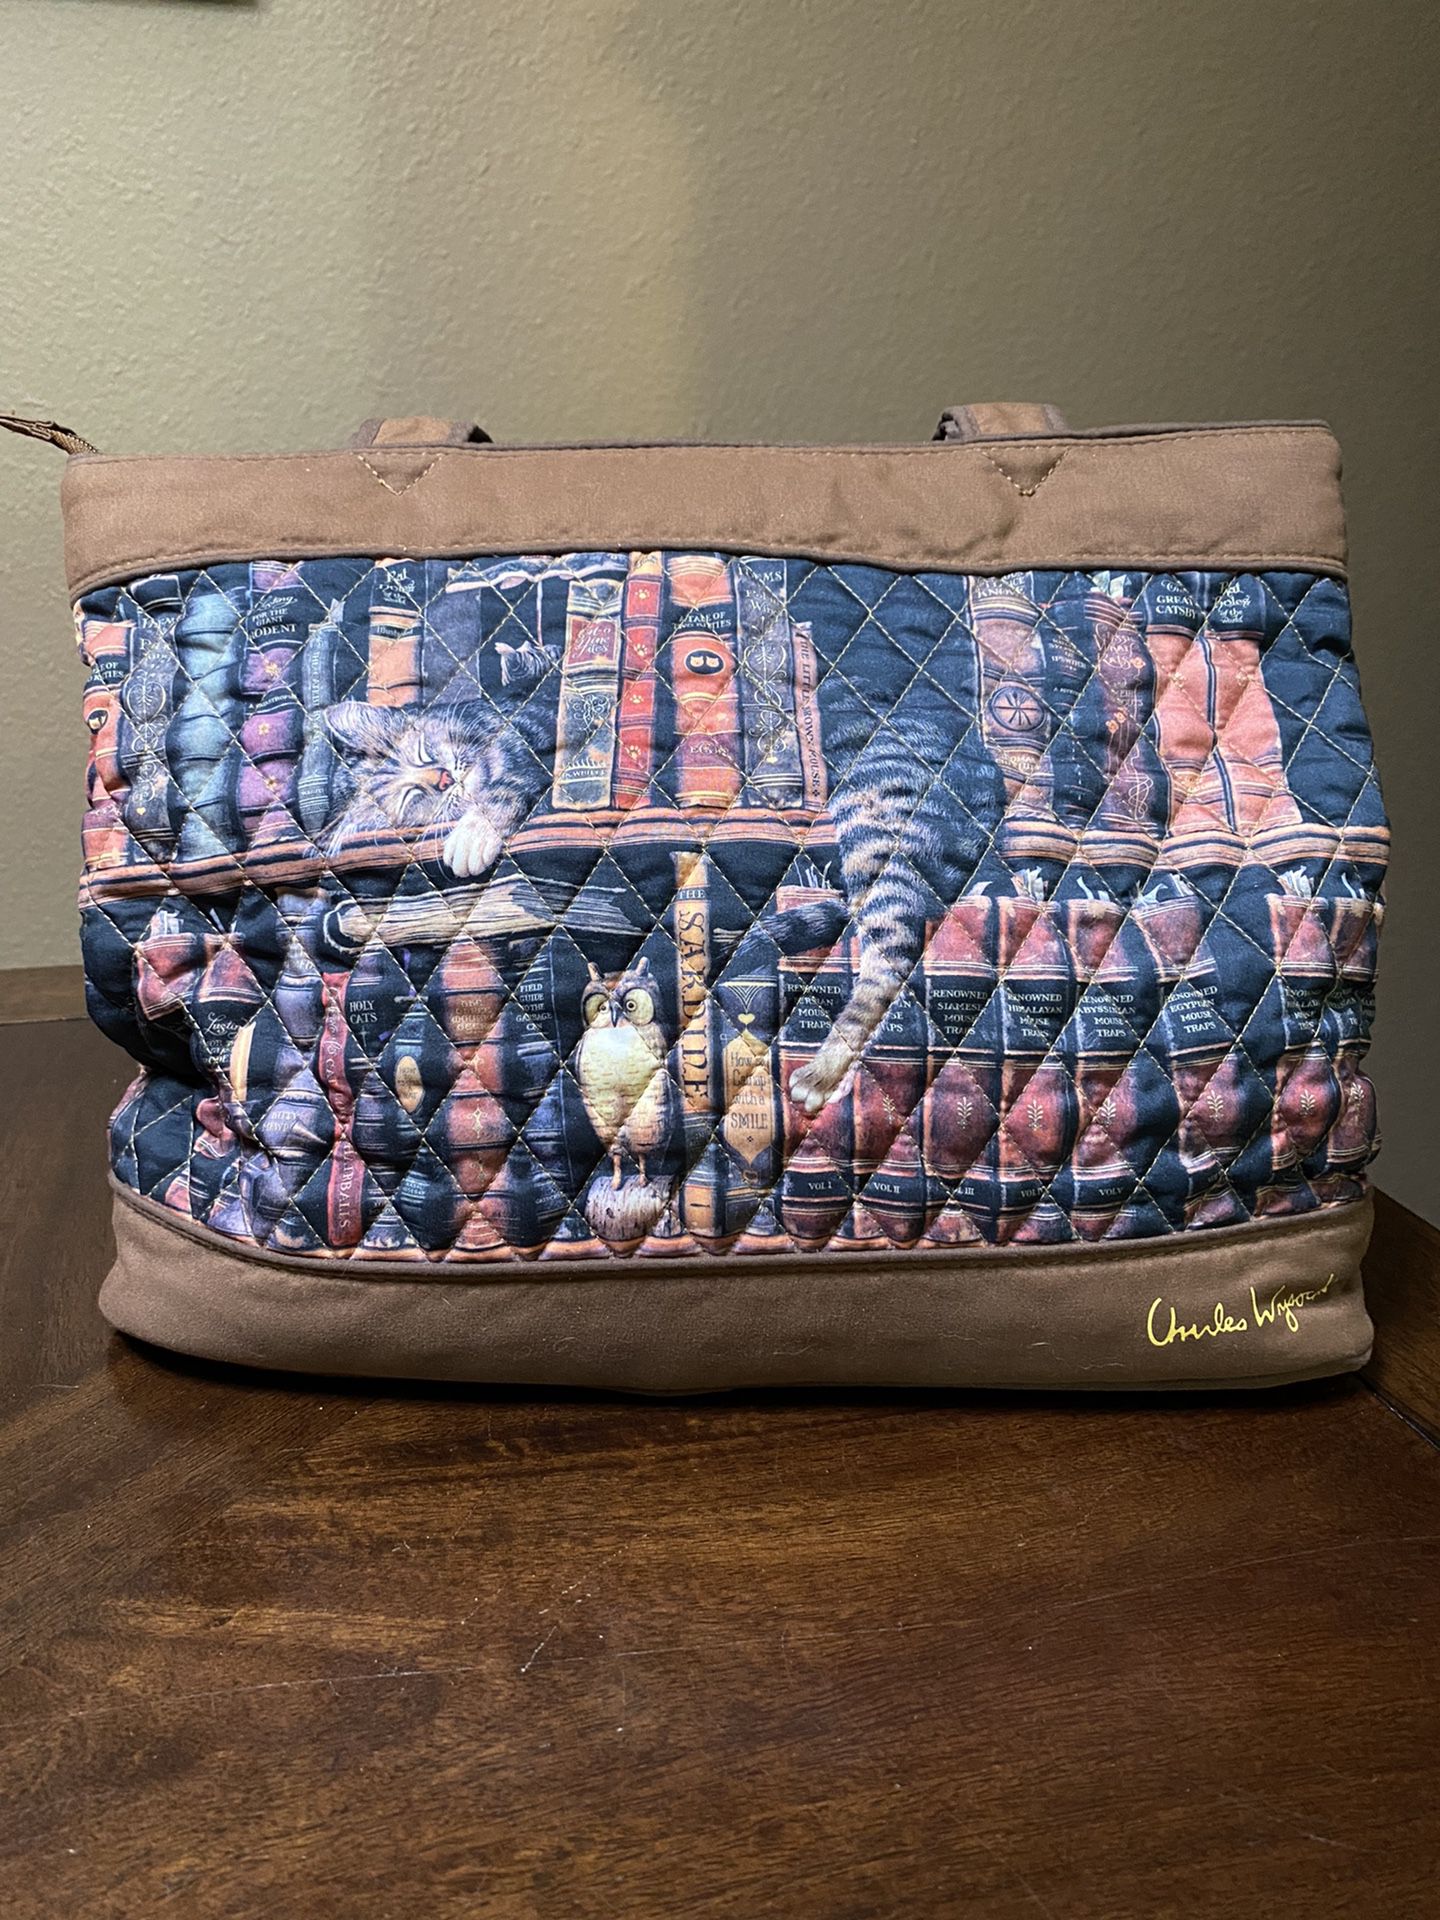 Charles Wysocki "Purrfect Tales" Quilted Tote Bag